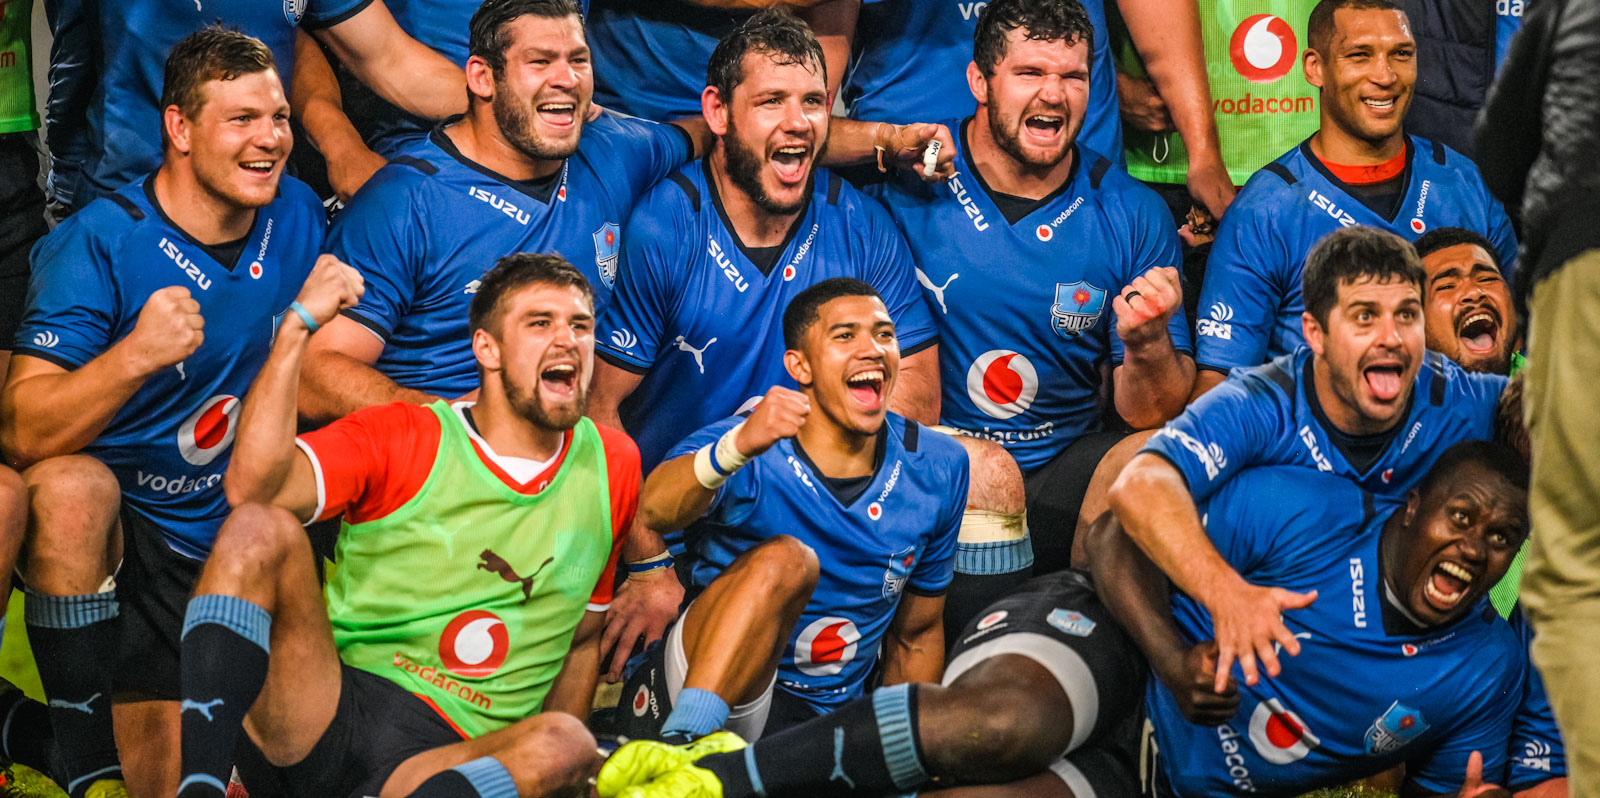 The Vodacom Bulls after winning the Rainbow Cup SA competition earlier this year.